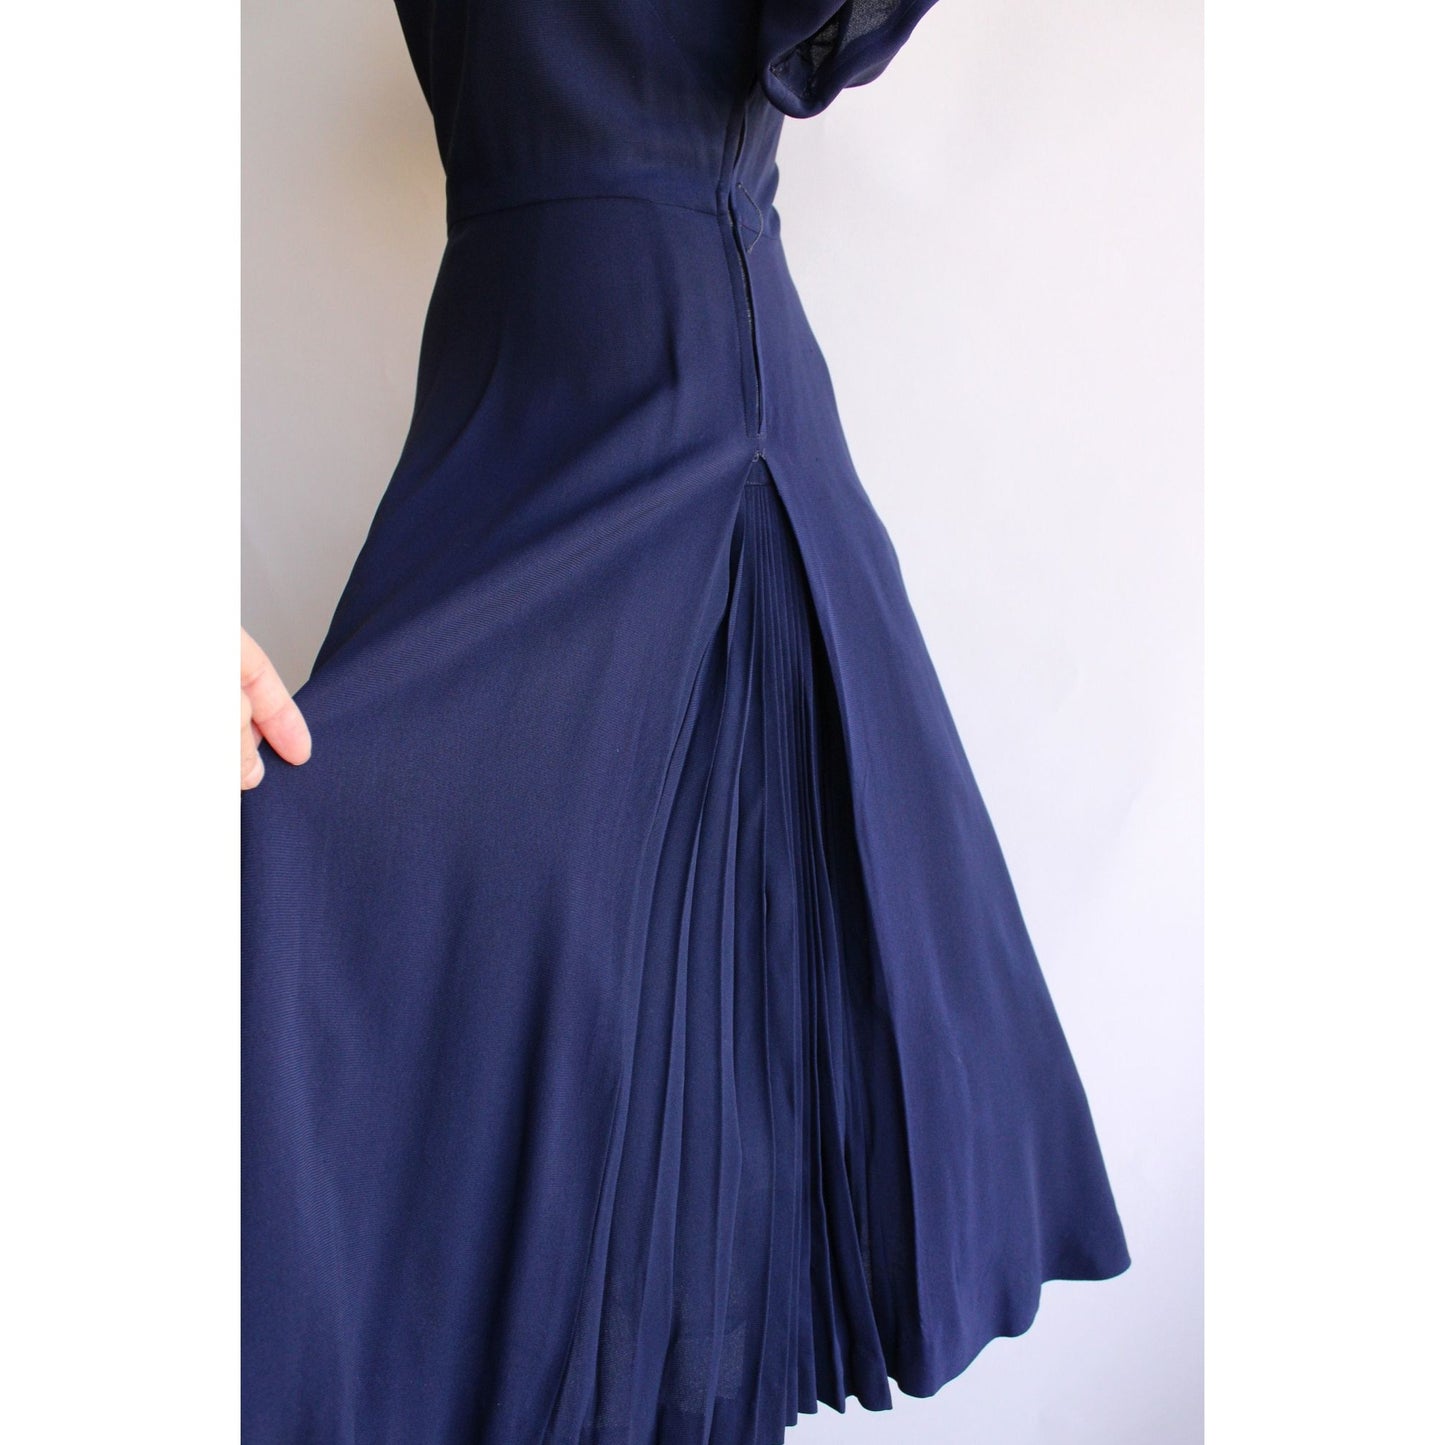 Vintage 1940s Rayon Navy Blue New Look Dress with Pleated Skirt